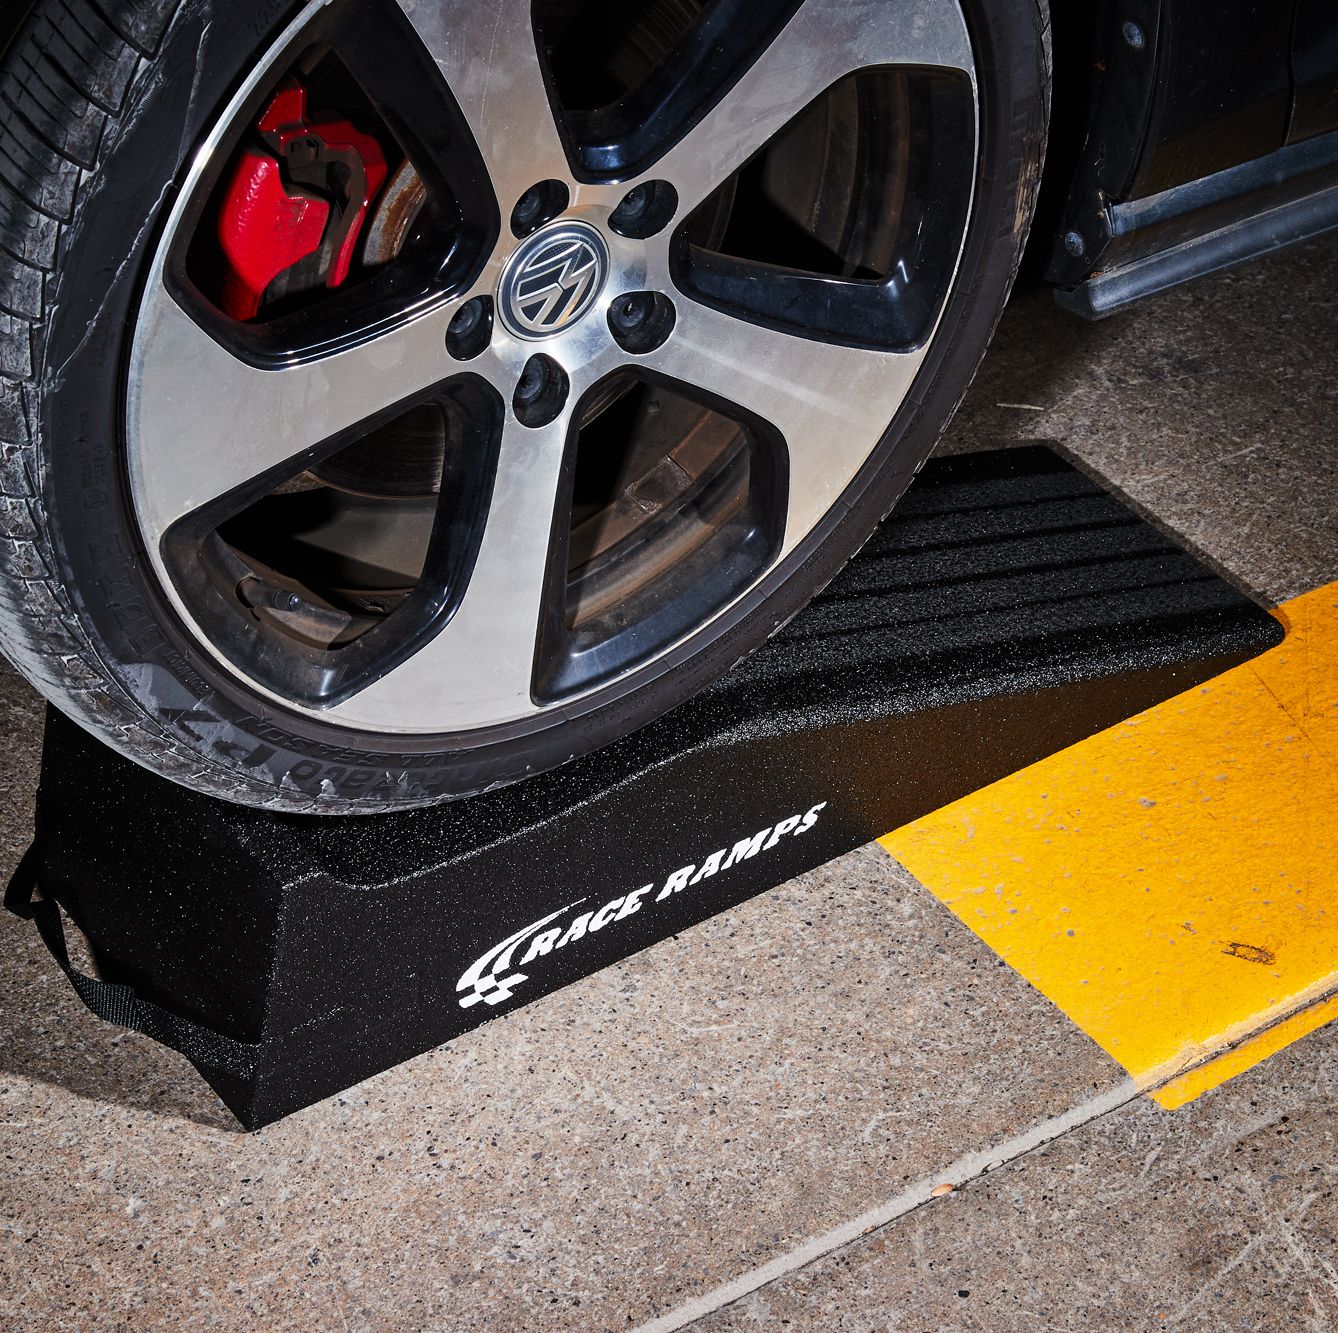 Get Race Ramps—Not a Floor Jack—If You Want to Work Under Your Car